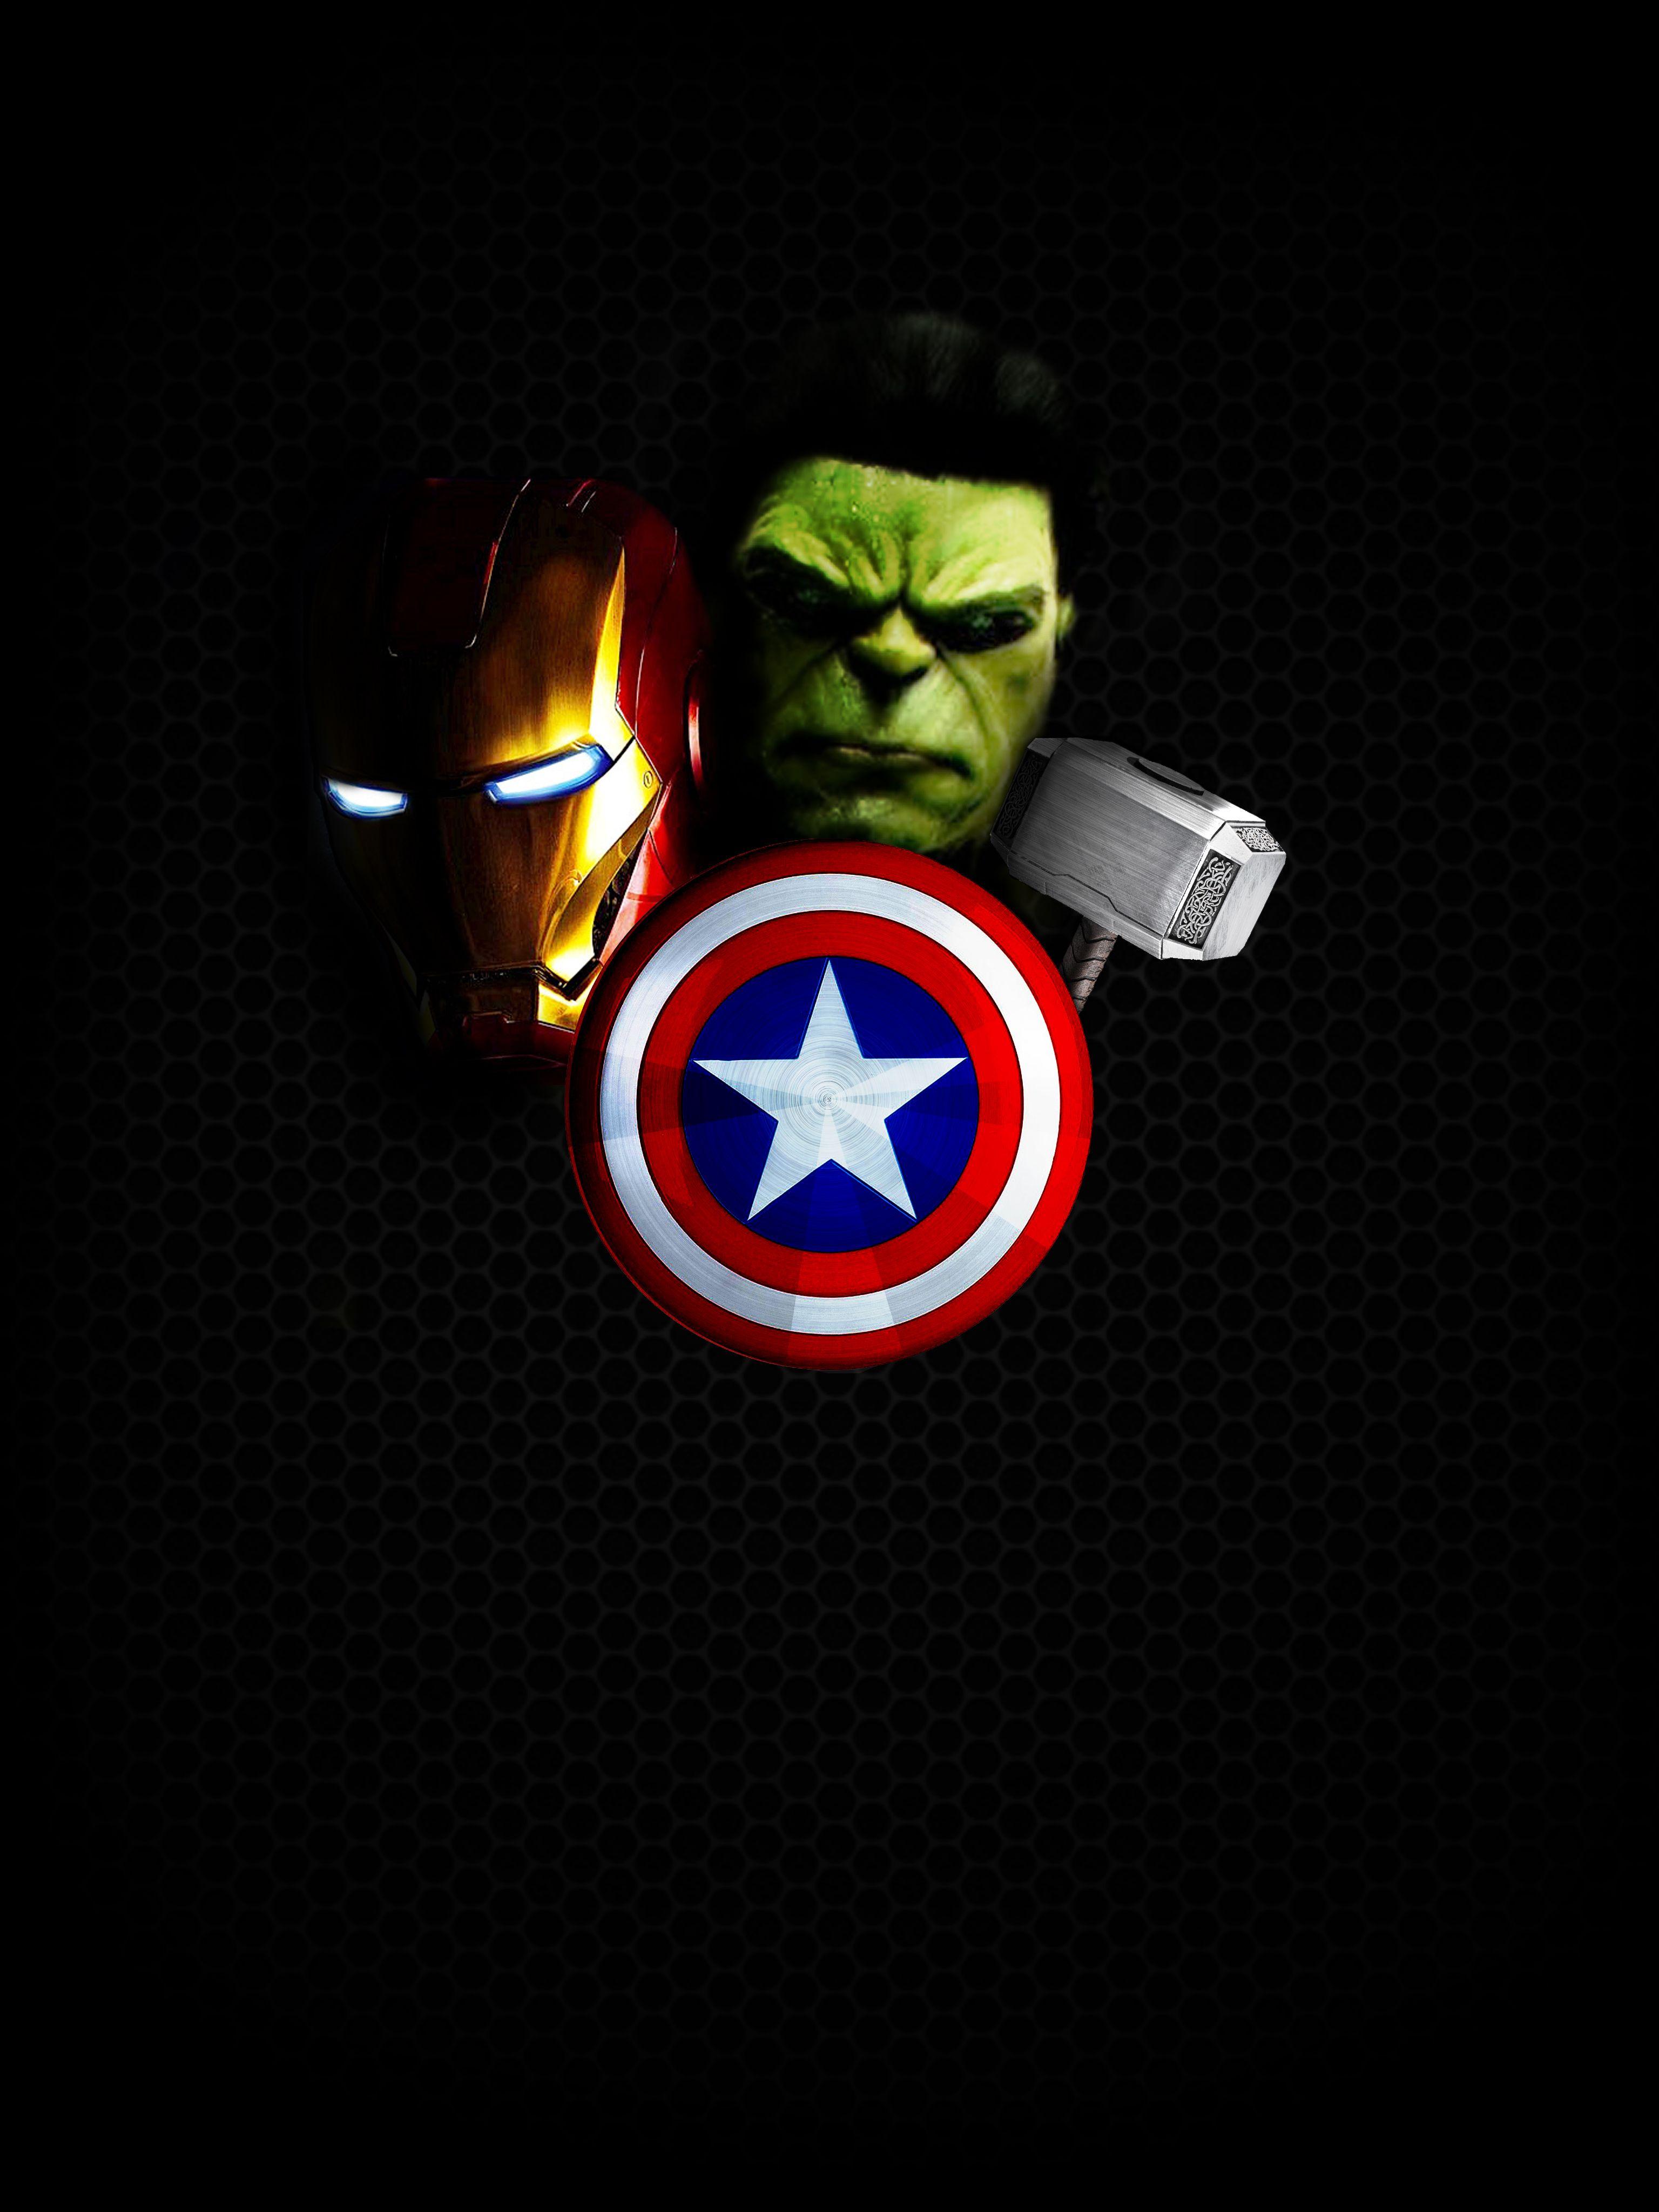 Avengers Android Wallpapers Top Free Avengers Android Backgrounds